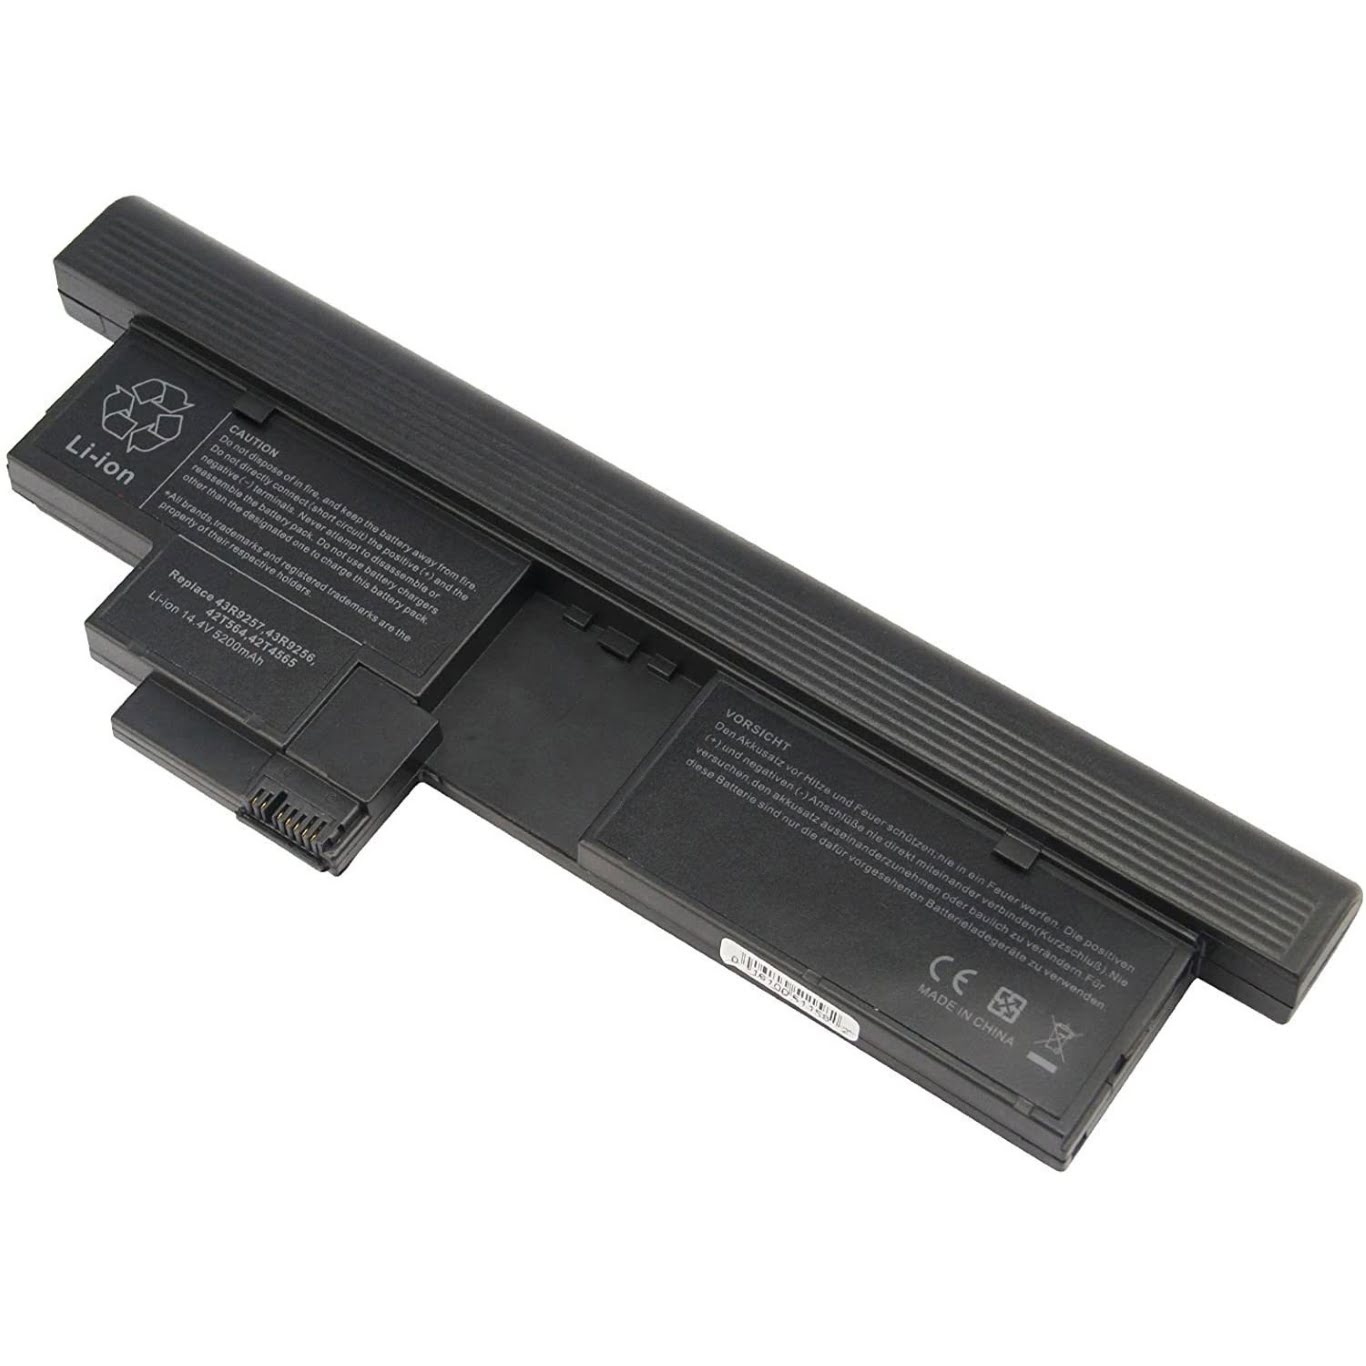 42T4564, 42T4657 replacement Laptop Battery for Lenovo ThinkPad X200 Tablet, ThinkPad X200 Tablet 2263, 4400mAh, 14.8V